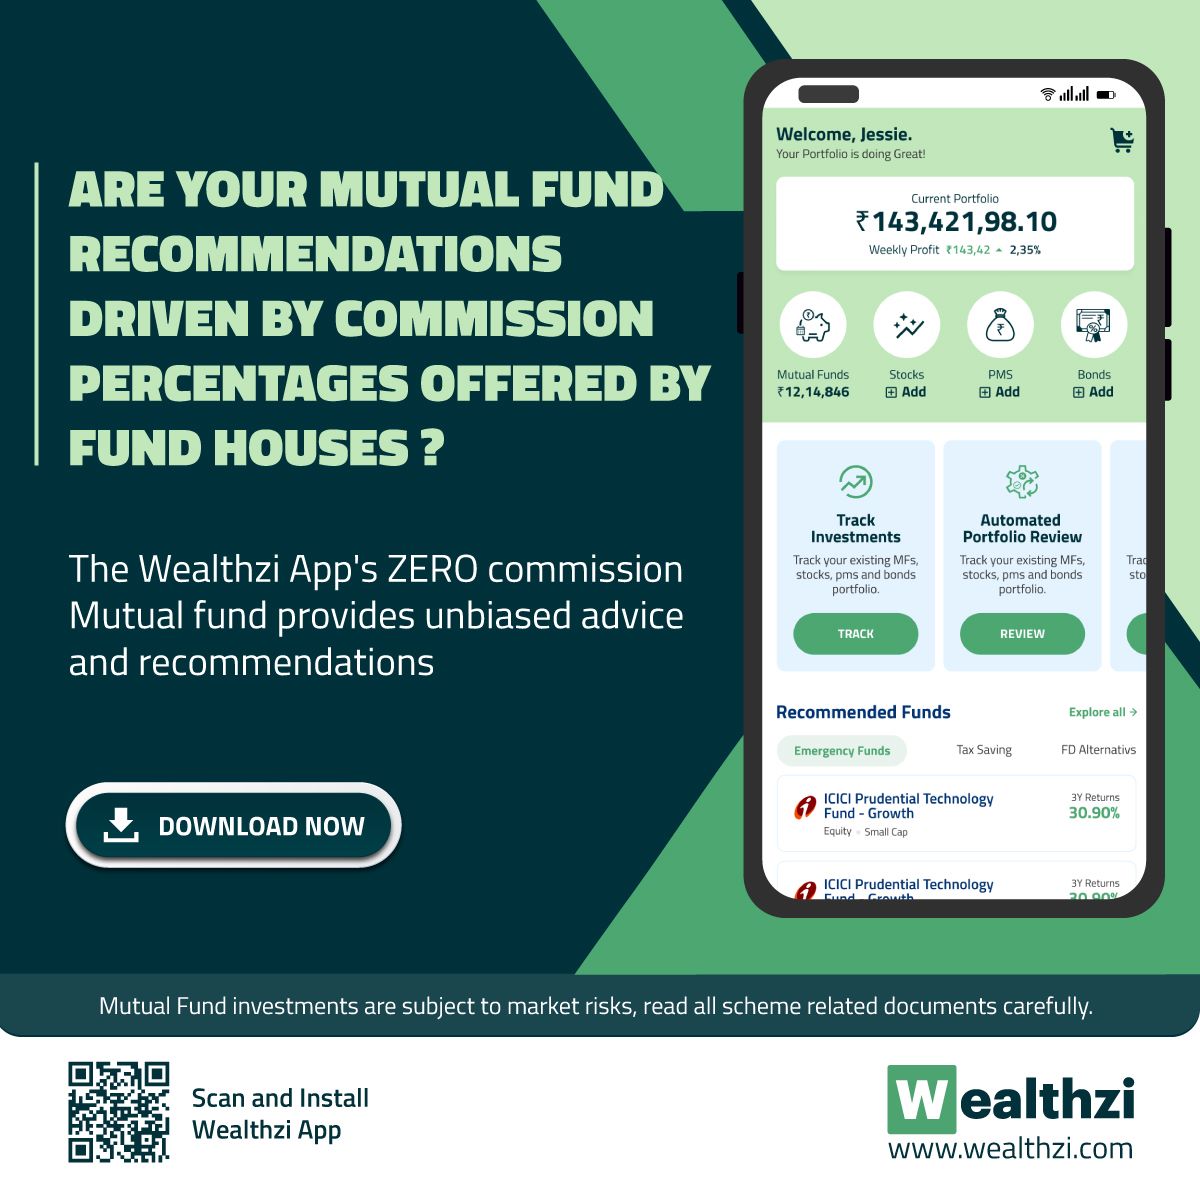 Get commission-free recommendations for mutual funds that can boost your financial growth! 

Download the Wealthzi Appk wealthzi.app.link

#Wealthzi #InvestmentGateway #CommissionFreeRecommendations #MutualFunds #FinancialGrowth #Wealthzi